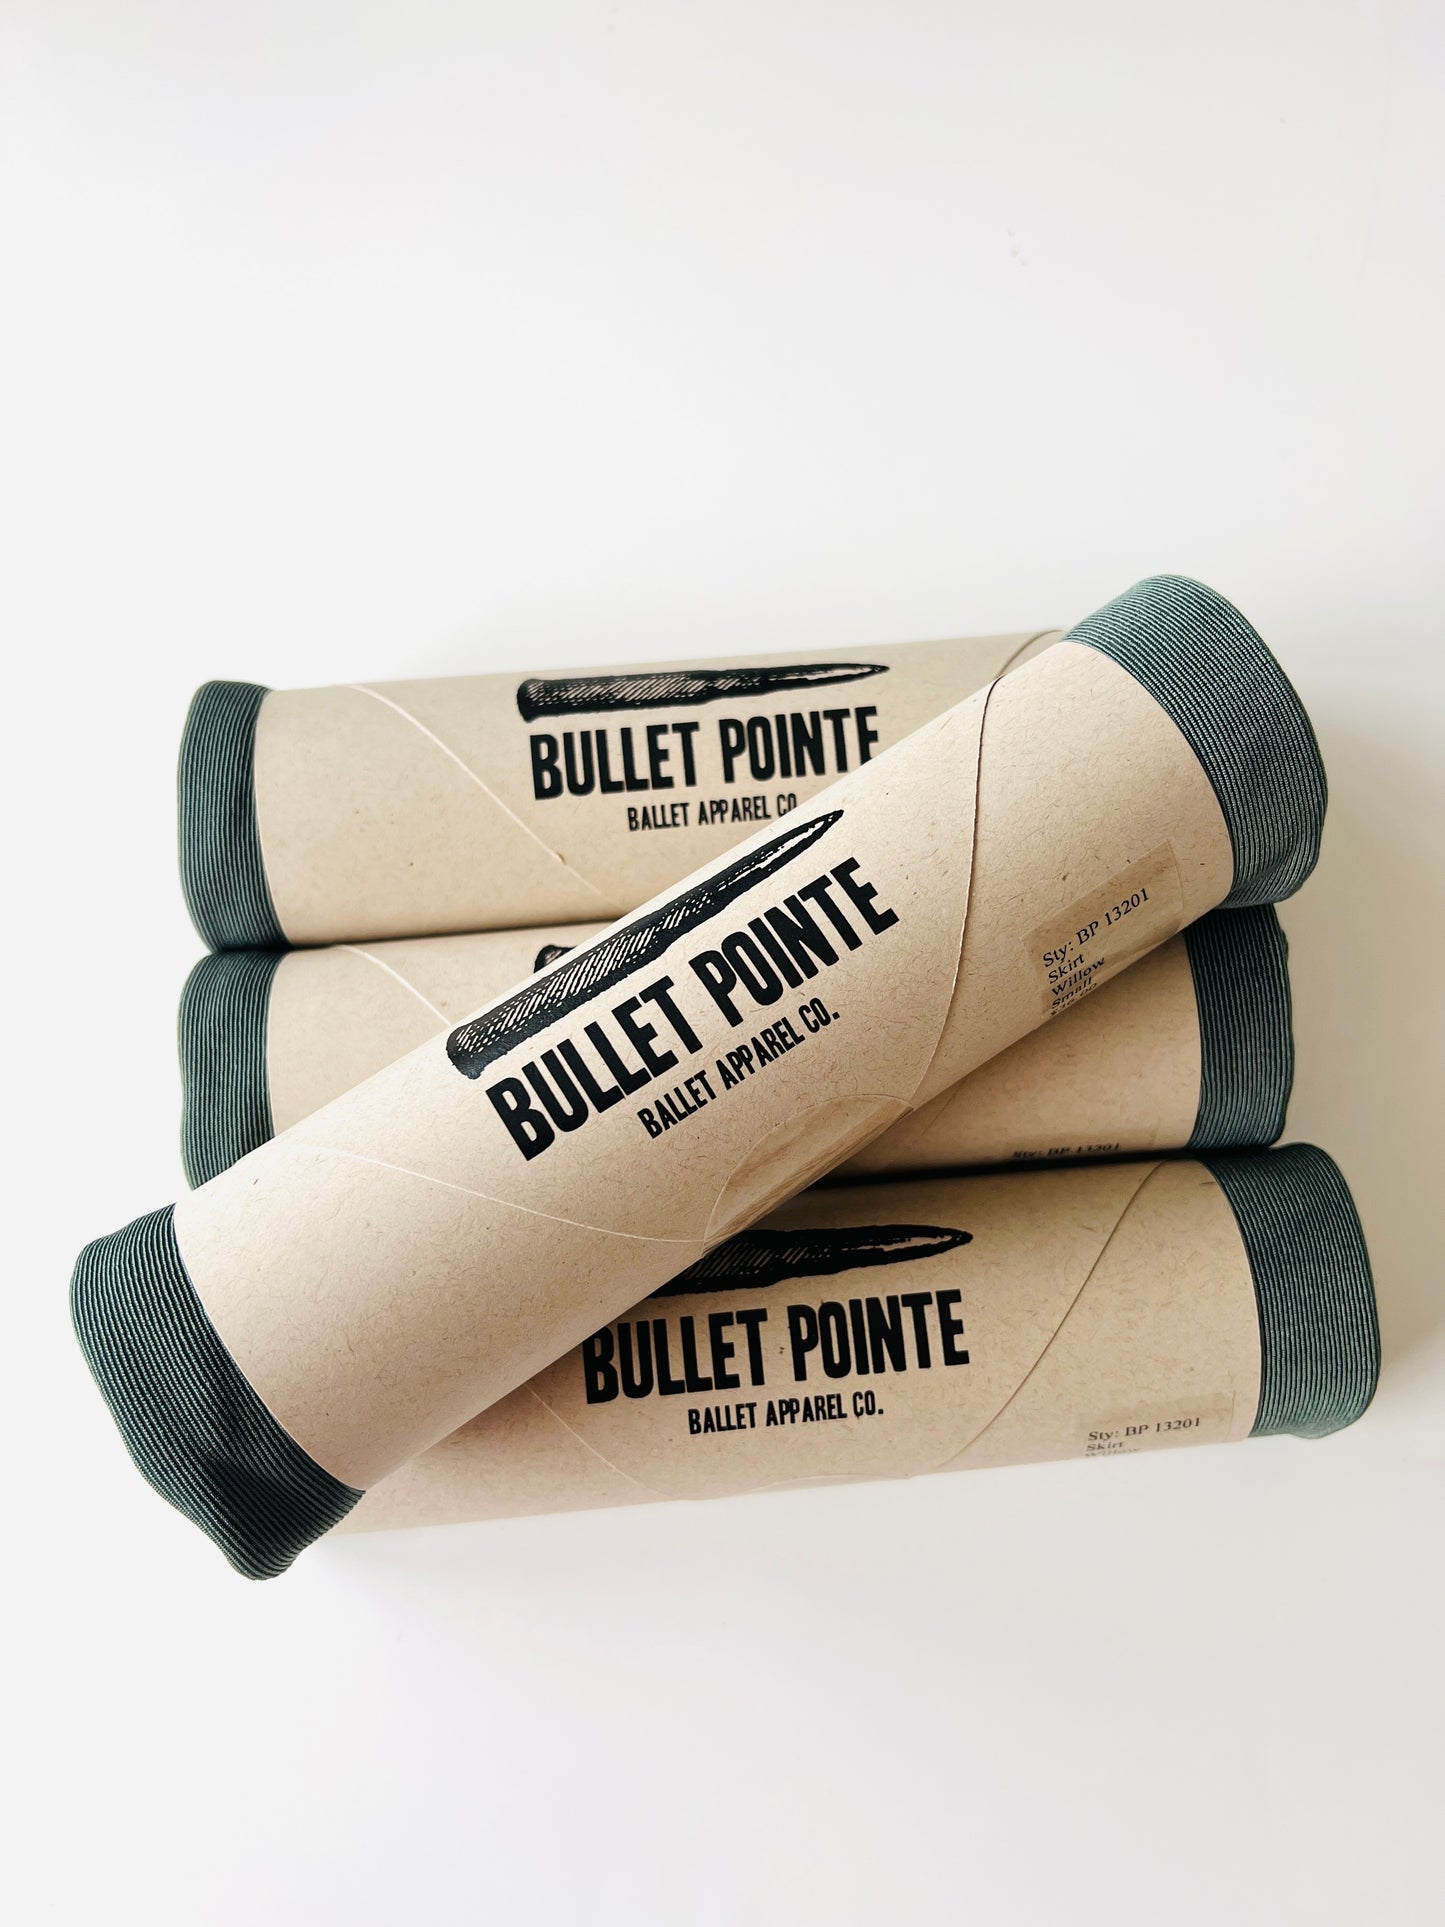 Bullet Pointe ballet SAB Skirt in Willow Green Willow Olive from the collective dancewear